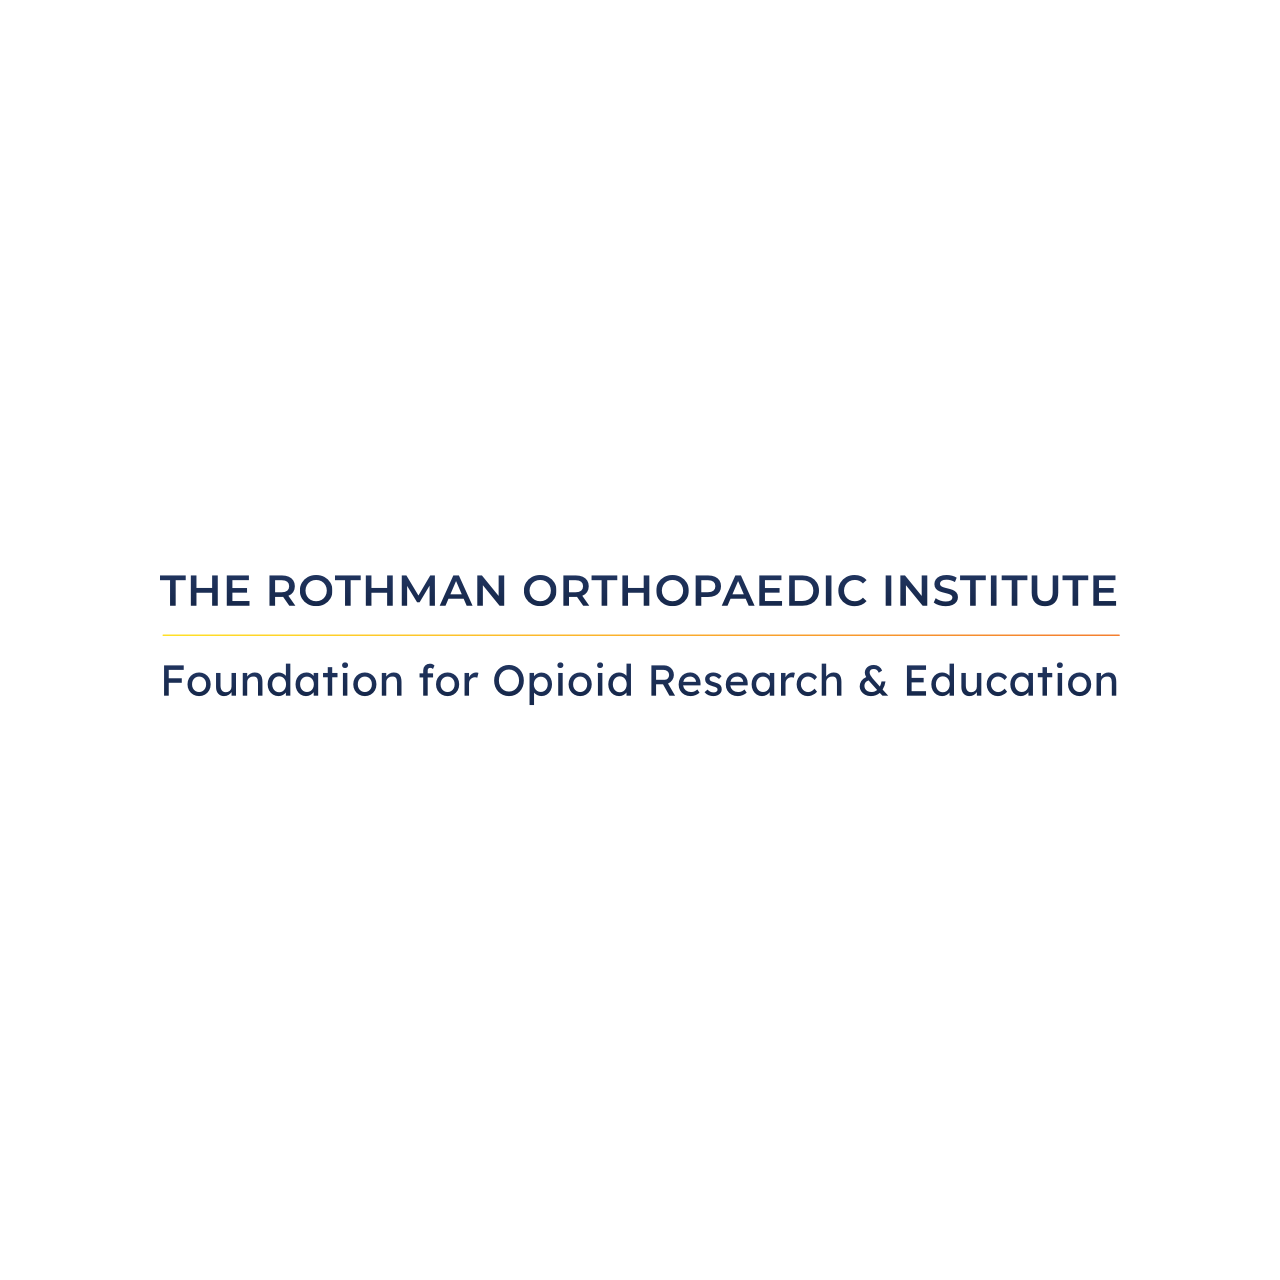 The Rothman Orthopedic Institute Foundation for Opioid Research and Education